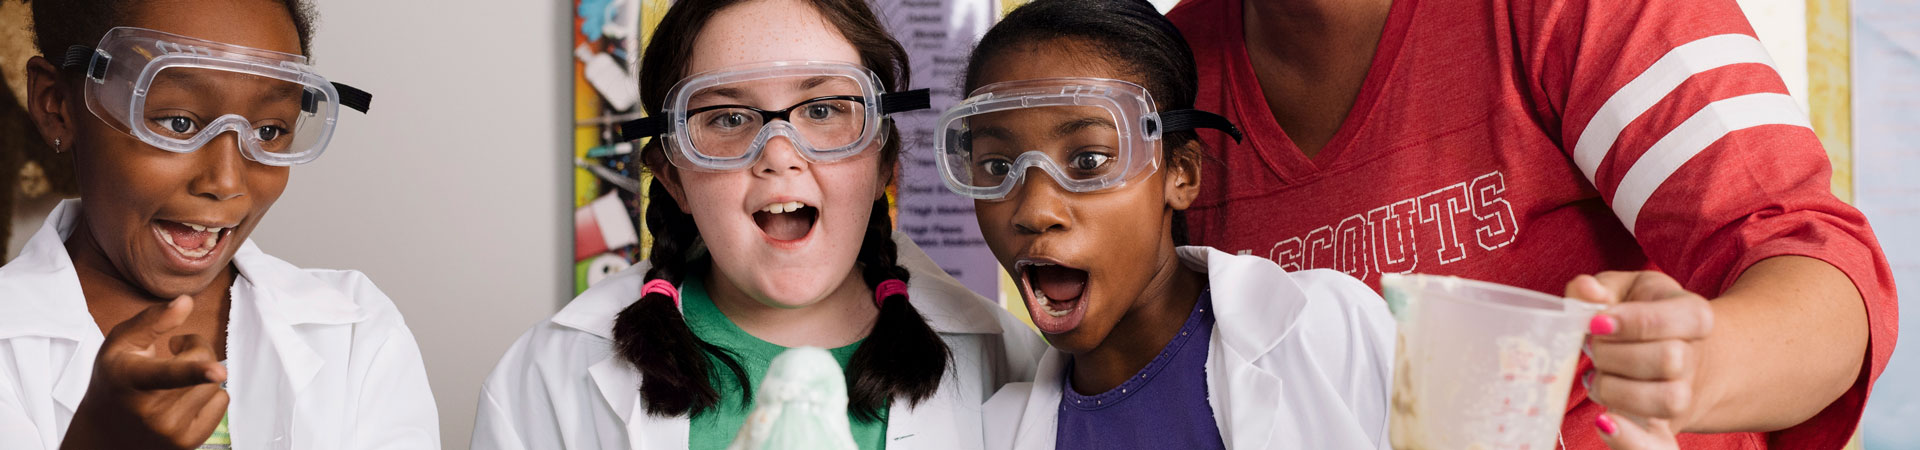  Three Girl Scouts wearing lab coats and goggles. They appear amazed at the results of a science experiment. 